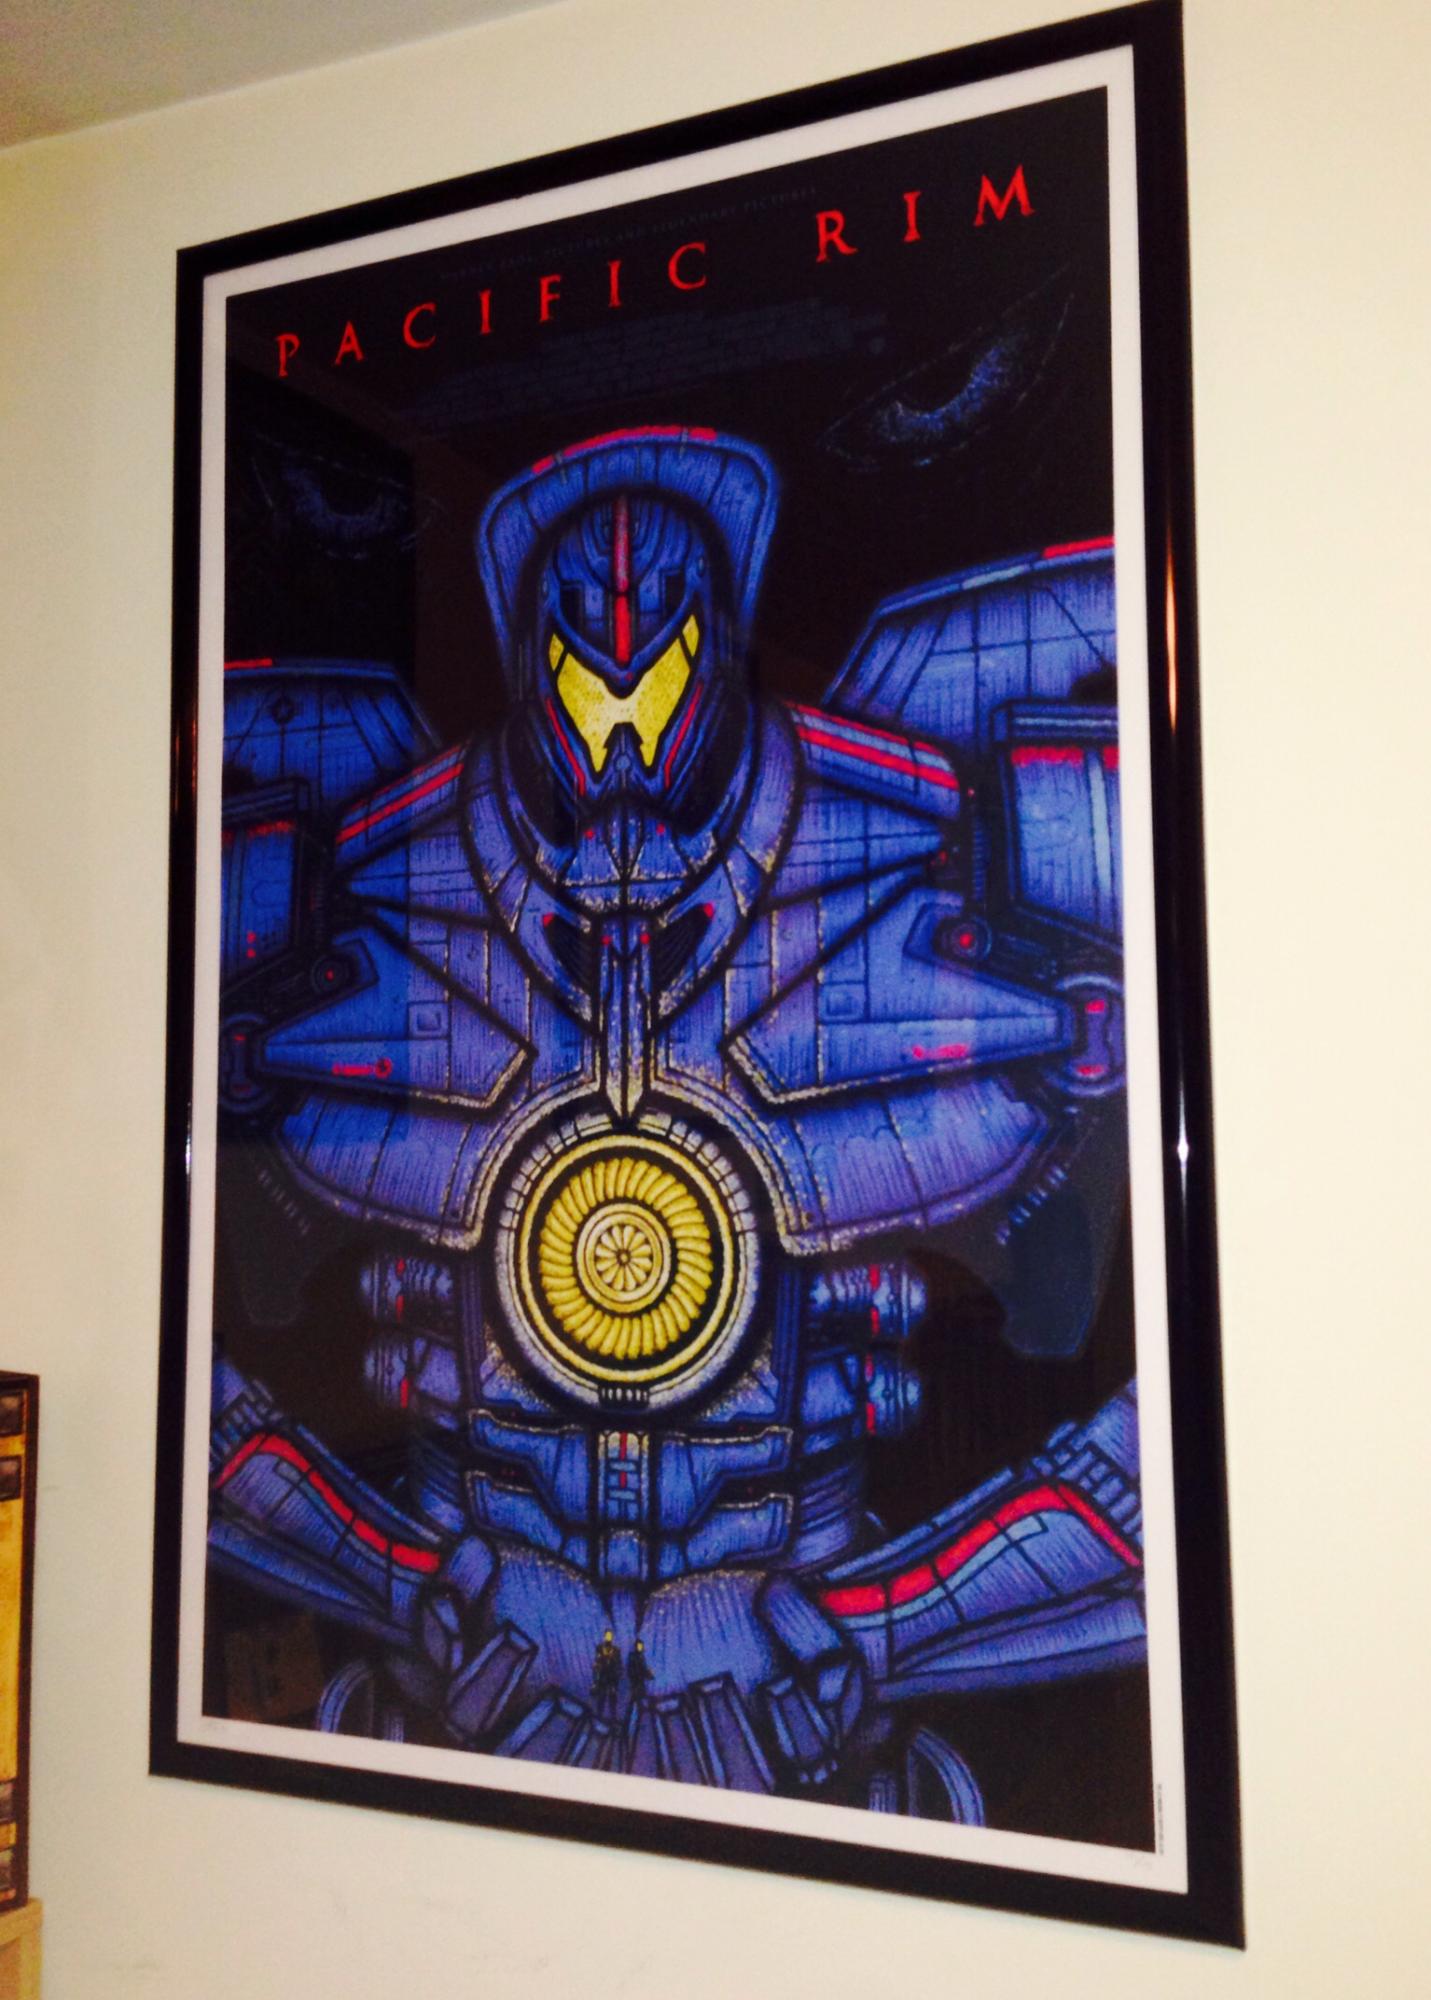 Pacific Rim Print by Todd Slater (Odd City Entertainment) - Numbered - #171/175 - 24" x 36"